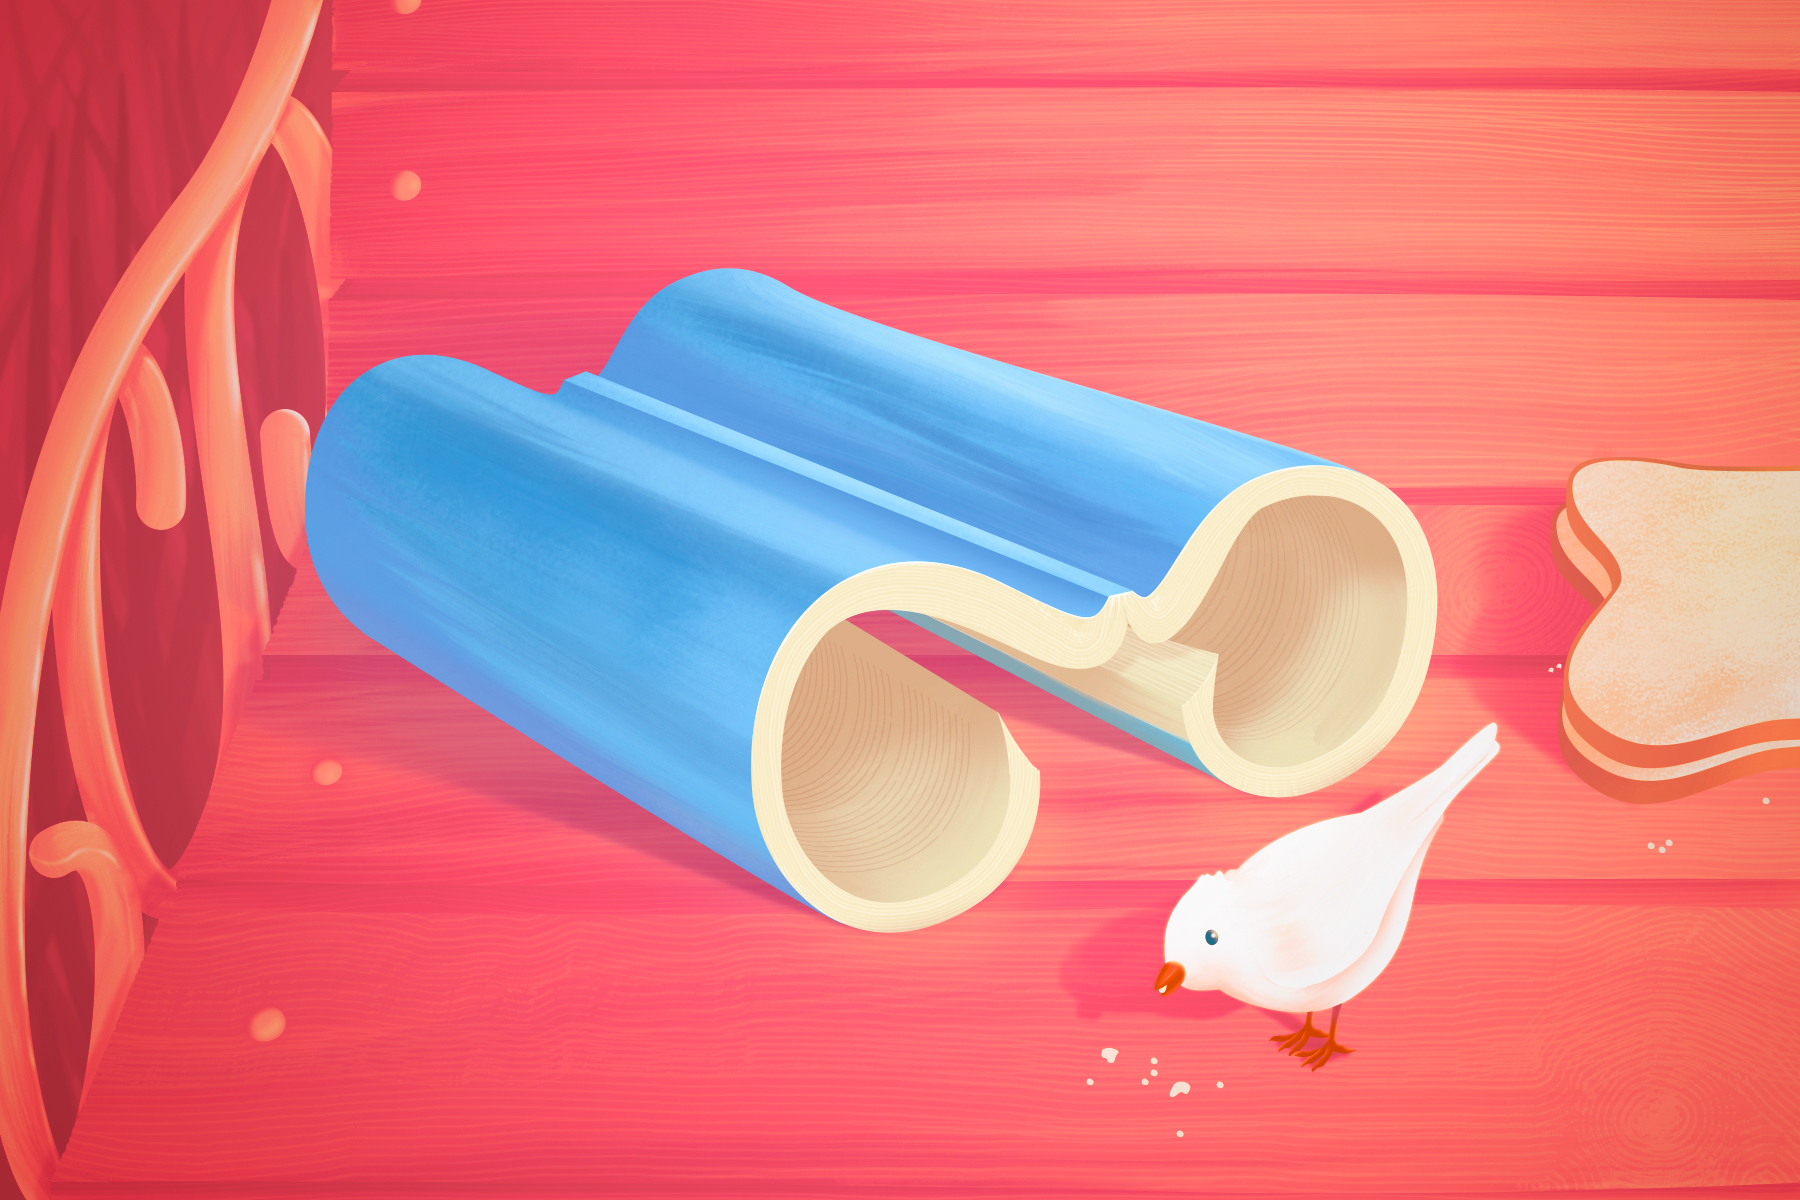 Image of an open book looking like binoculars with a white bird on a red background